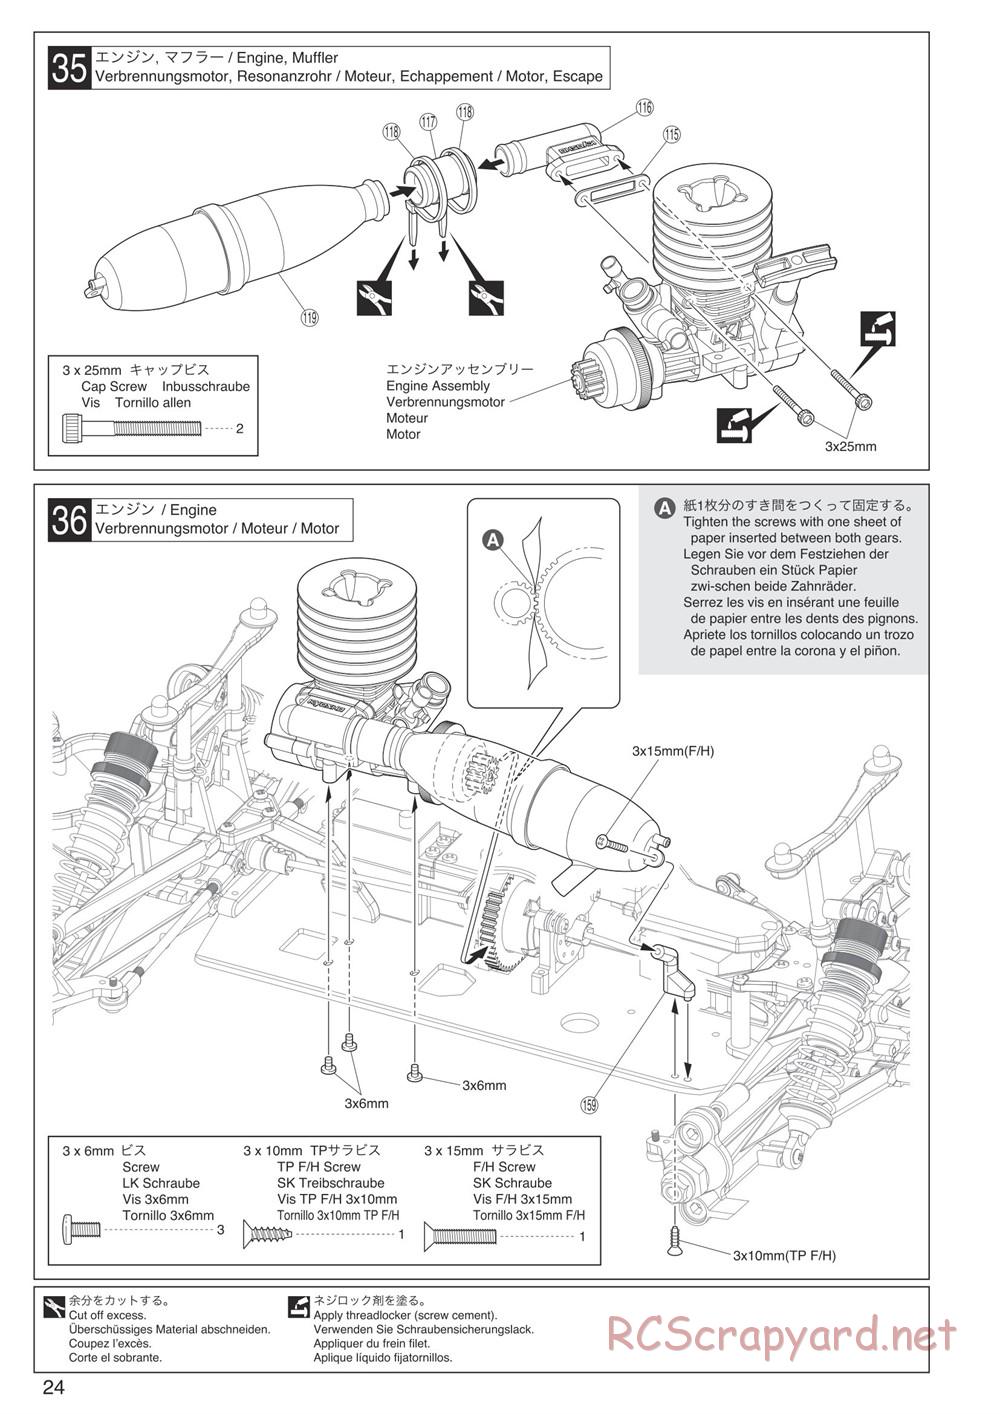 Kyosho - DMT - Manual - Page 24